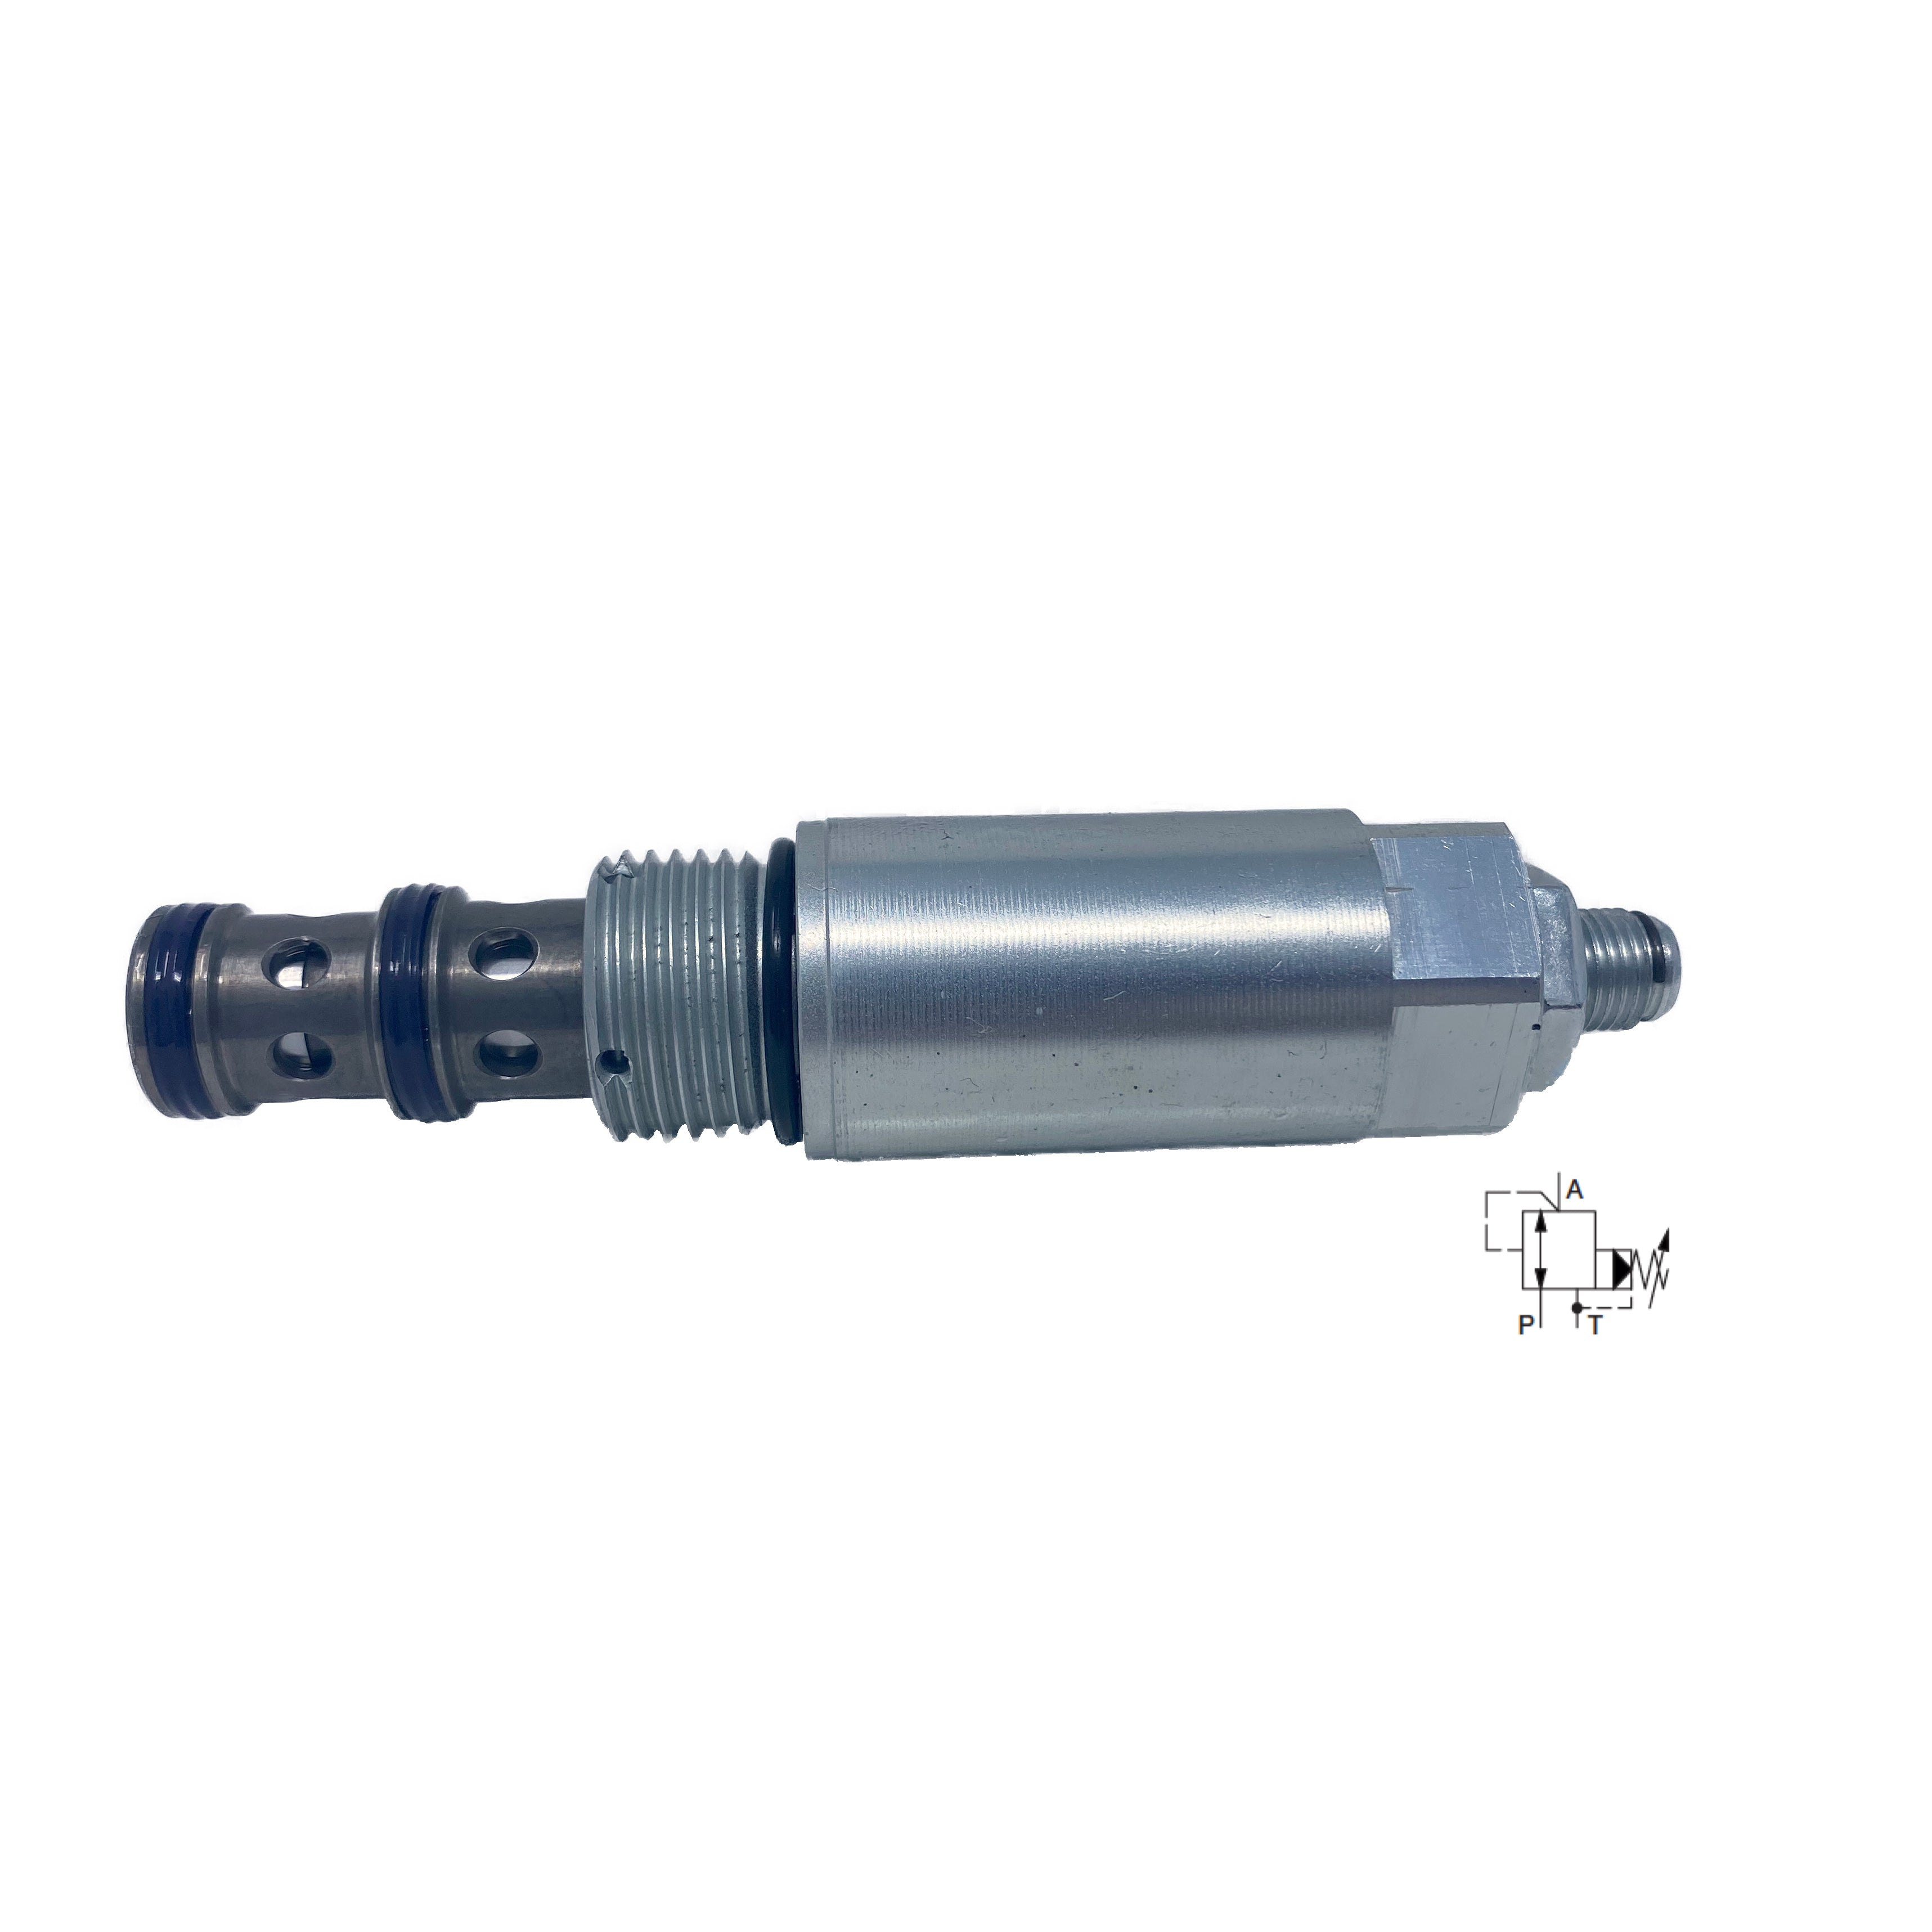 SP4A-B3/H25S-A : Argo Pressure Reducing Valve, Spool Type, Pilot Operated, Up to 3630psi, C-10-3